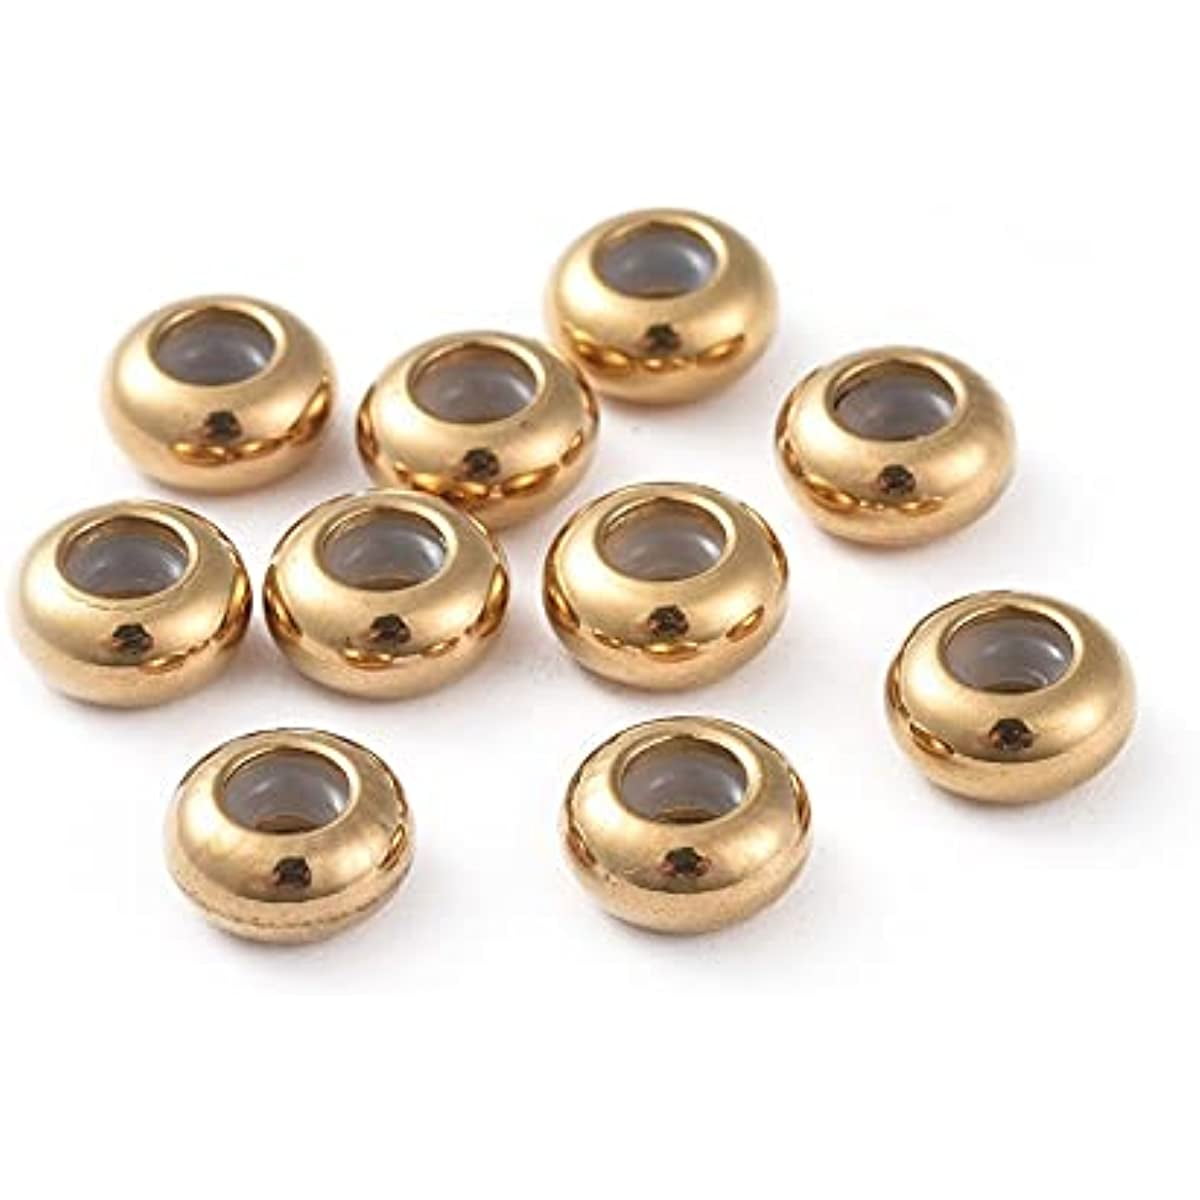 100pcs 6mm Cube Beads Metal Spacer Bead Stainless Steel Loose Bead Spacers Beads Metal Slider Beads for Bracelet Necklace Jewelry Making 3mm Hole